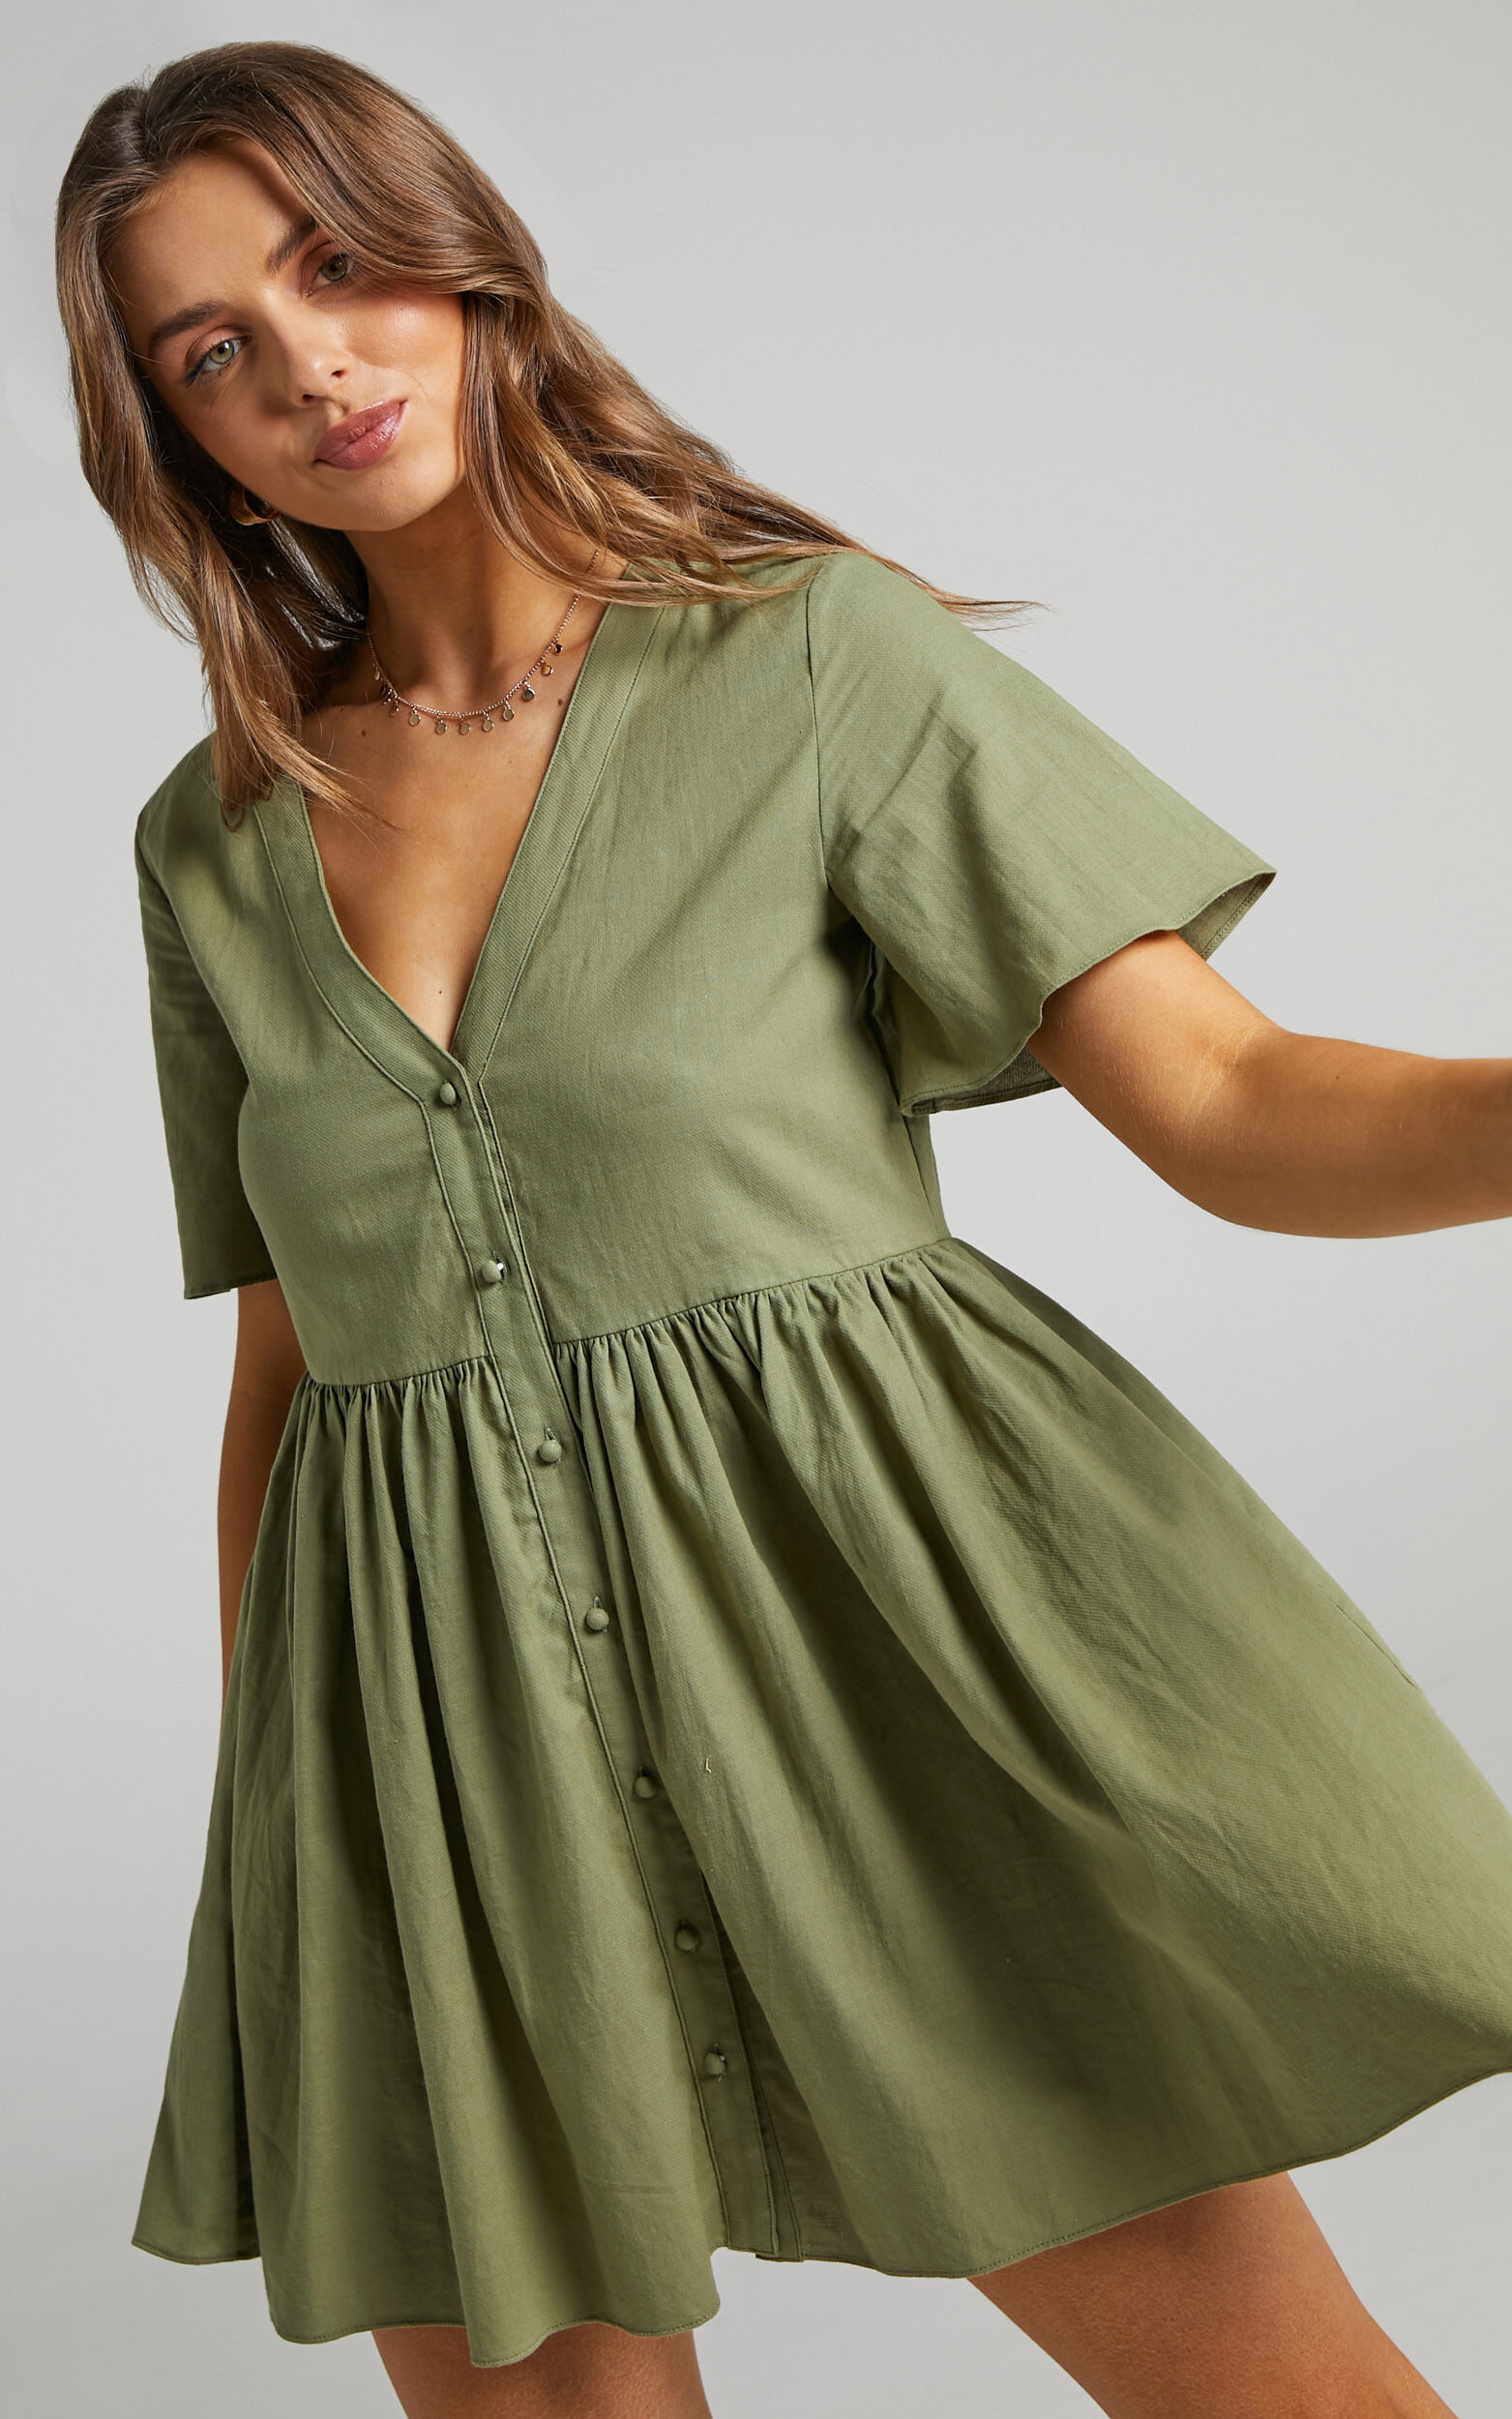 Staycation Smock Button Up Mini Dress in Khaki - 04, GRN2, super-hi-res image number null